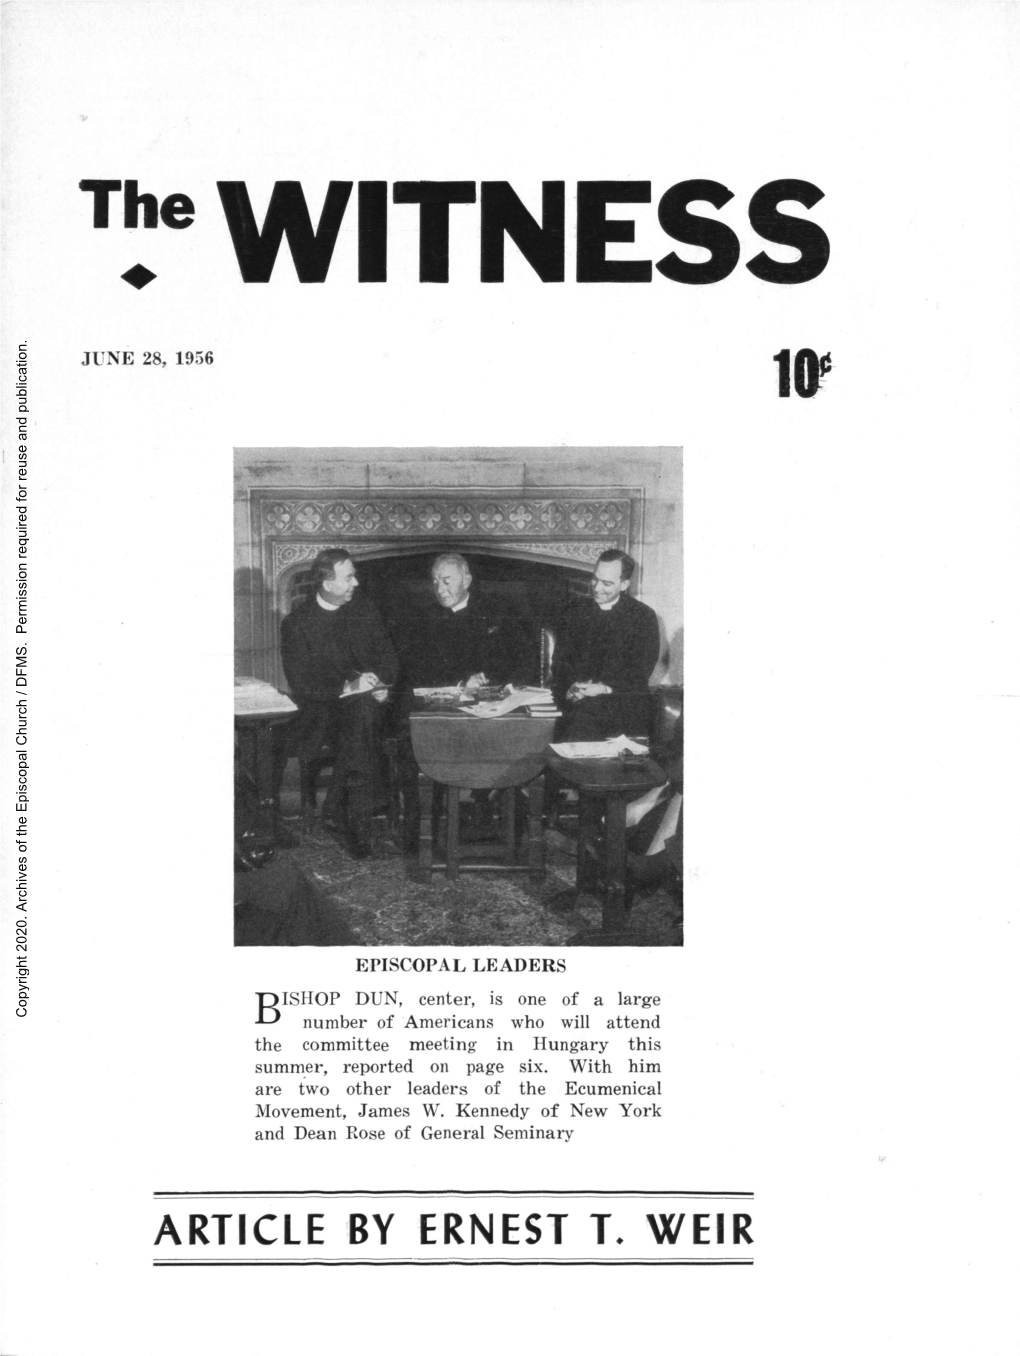 1956 the Witness, Vol. 43, No. 22